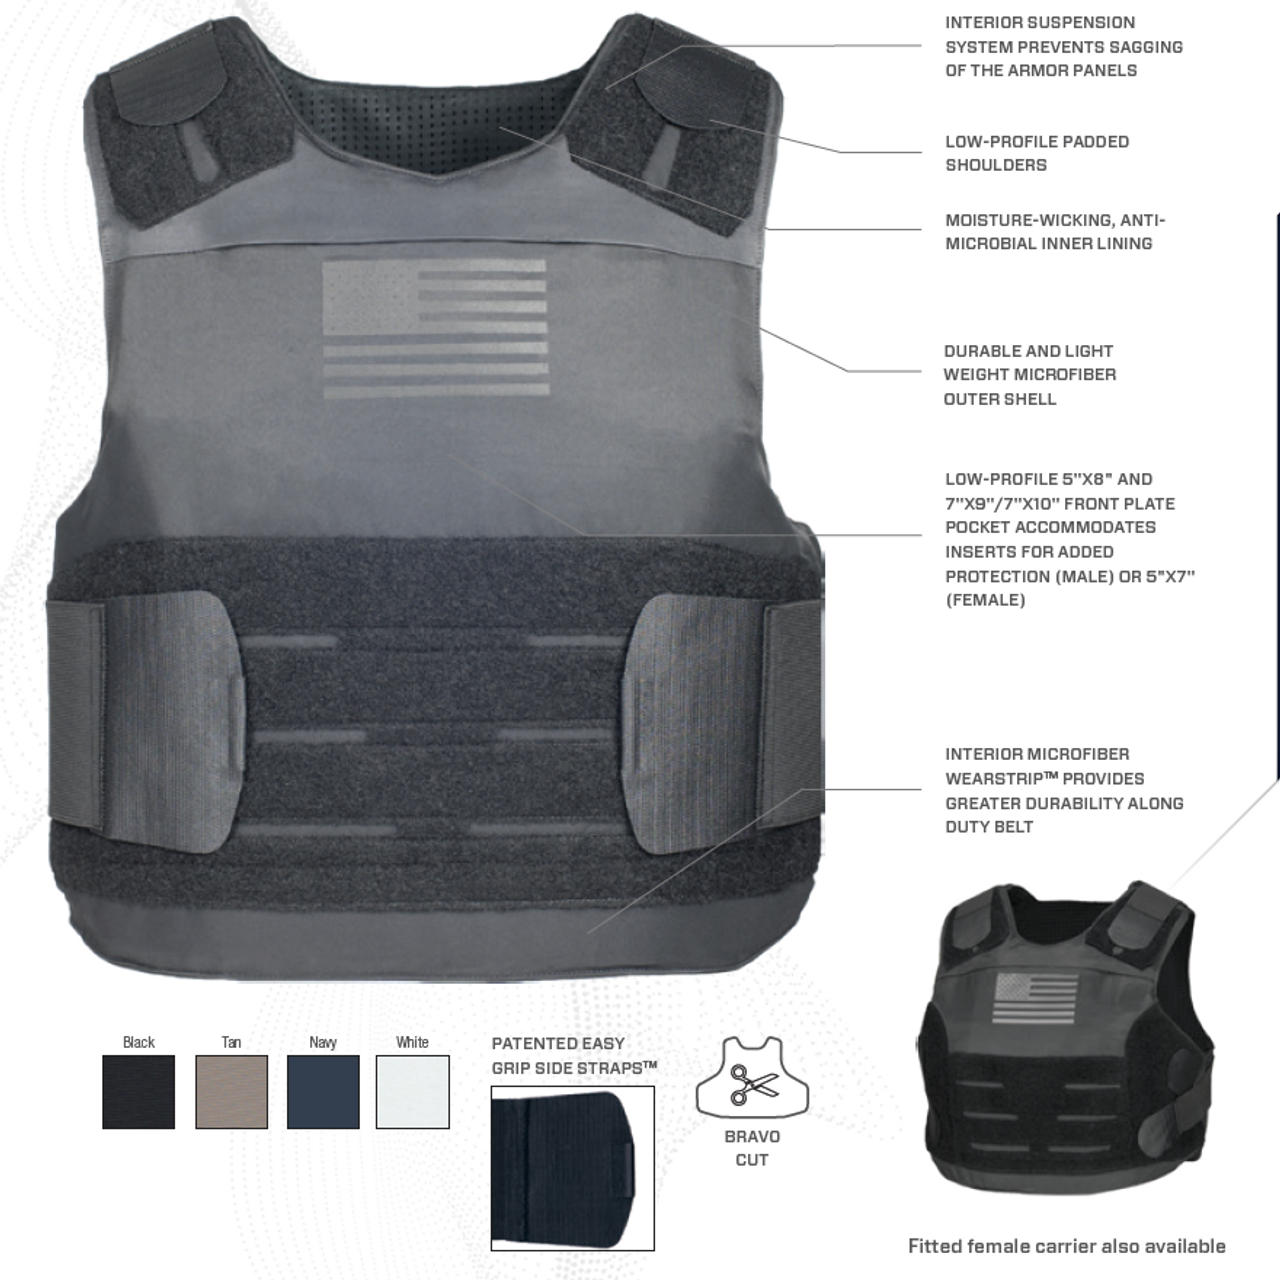 Armor Express American Revolution Men's Concealable Ballistic Body Armor Carrier, Choose Carrier only or Carrier and Panels (Soft Armor), NIJ Certified - Level 2, or Level 3A Threat Level - Interior suspension helps prevent sagging of armor